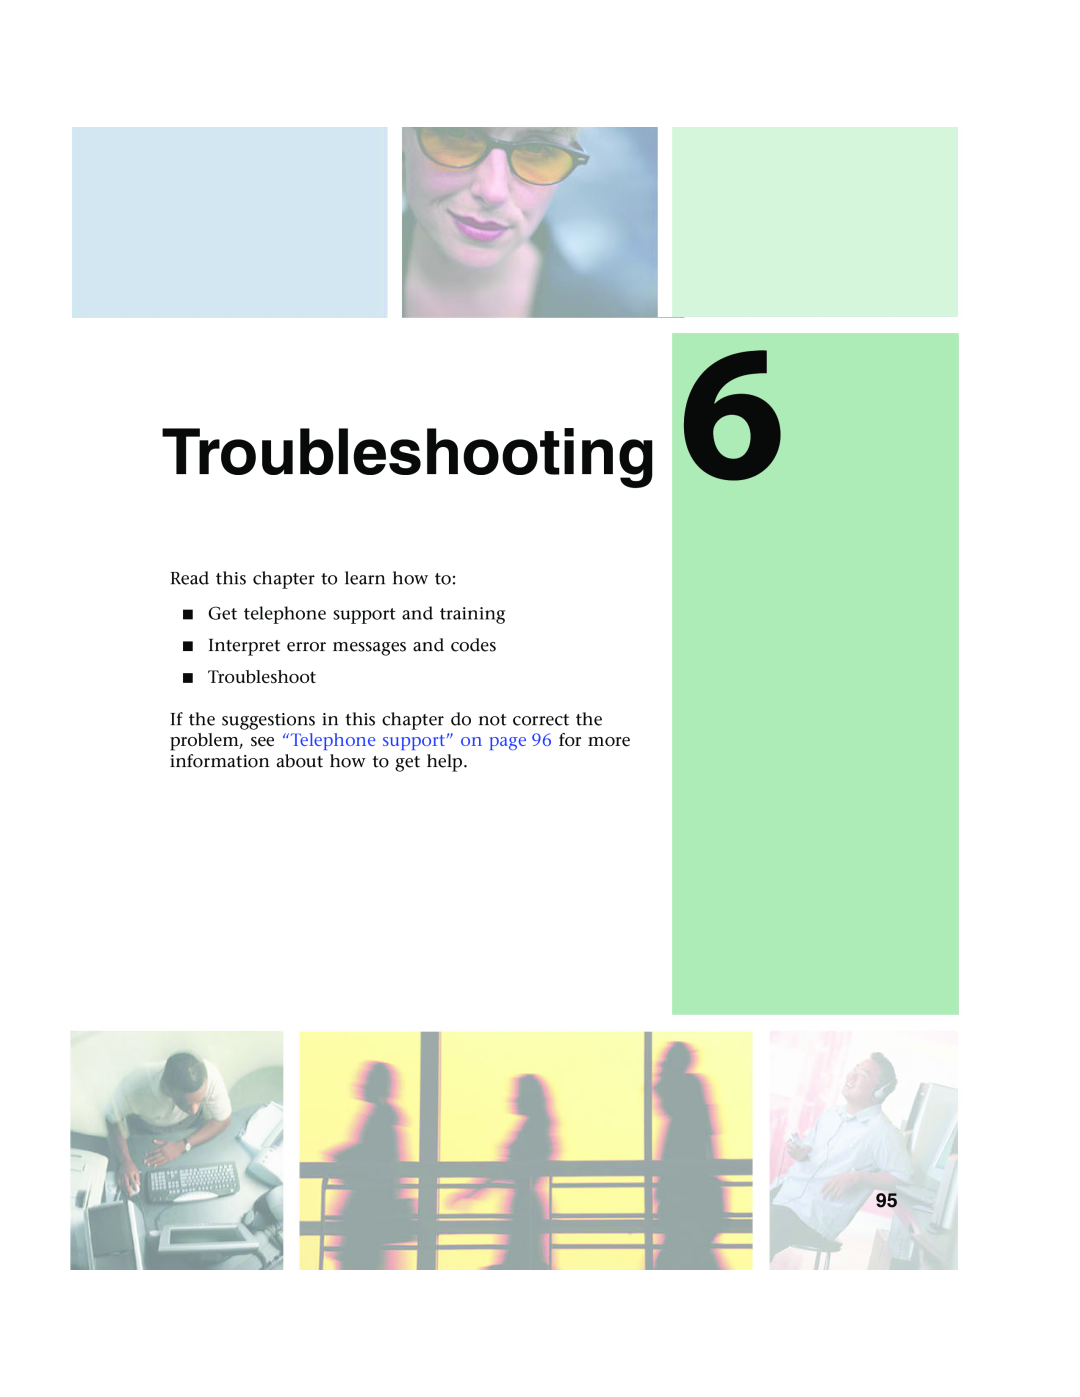 Gateway 955 manual Troubleshooting, Read this chapter to learn how to Get telephone support and training 